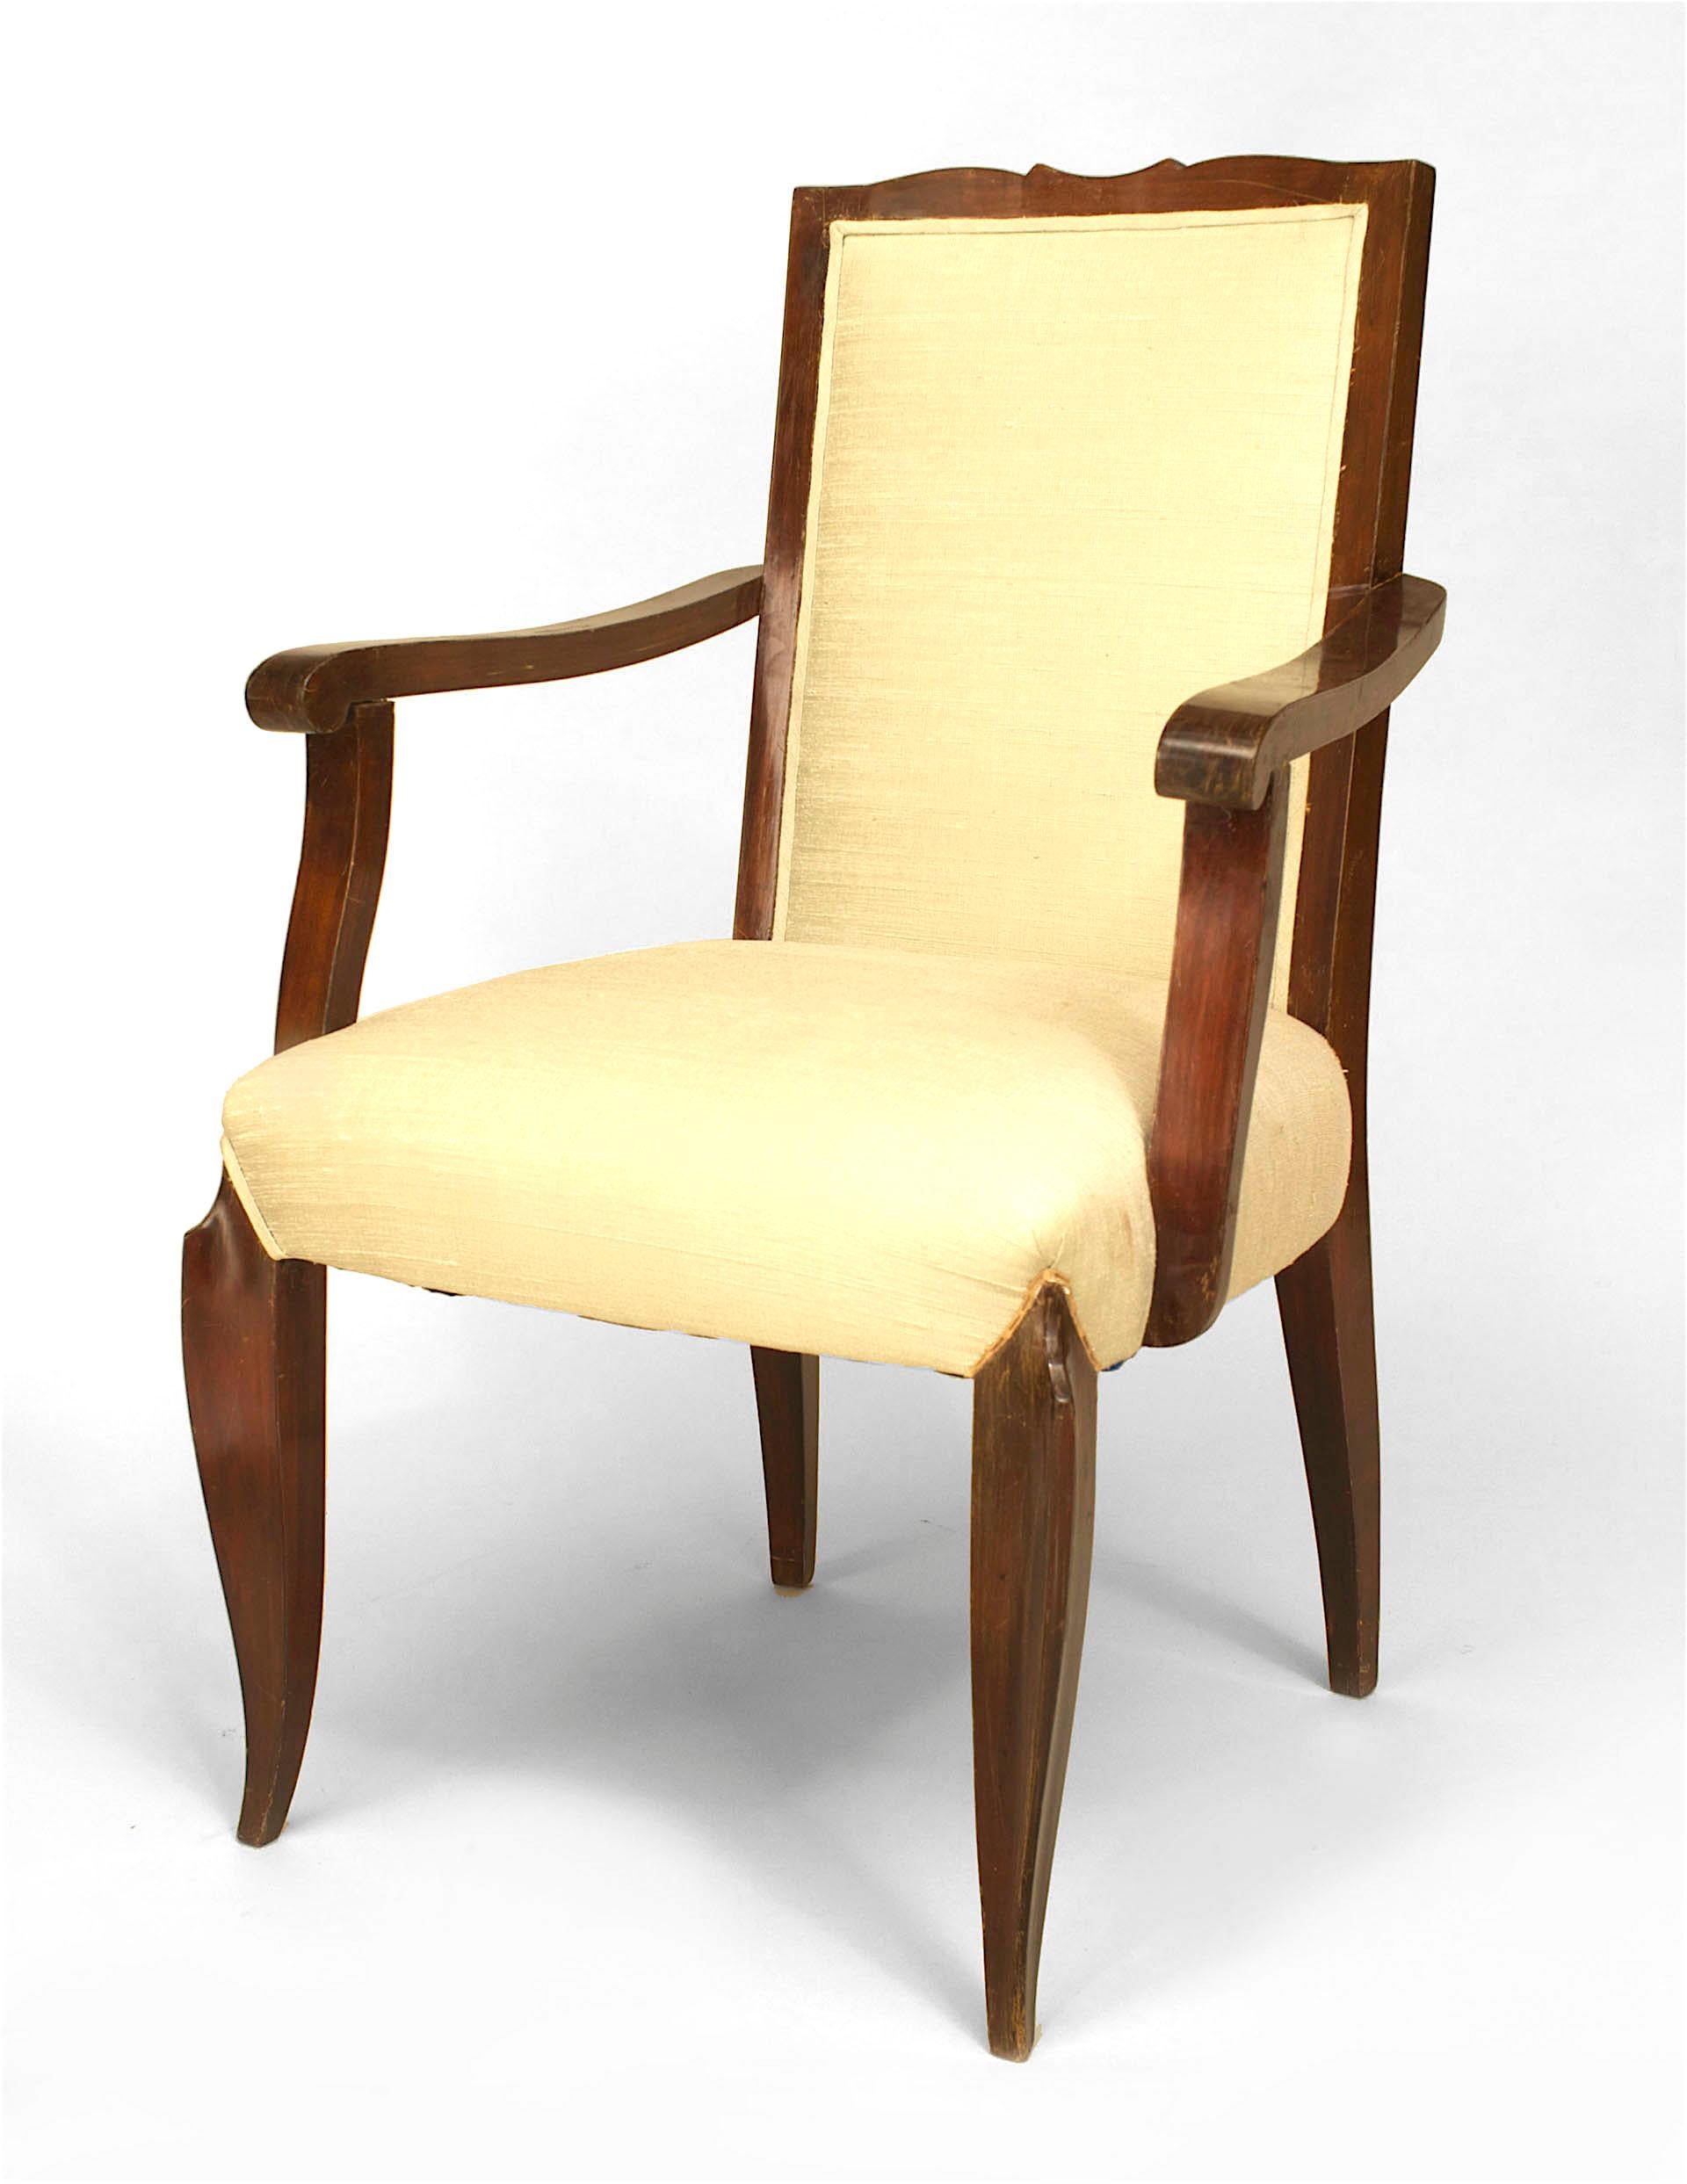 Set of 4 French Art Deco style (1950s) mahogany stained open arm chairs with a shaped back and cream upholstered seat and back. (manner of Jean Pascard)
